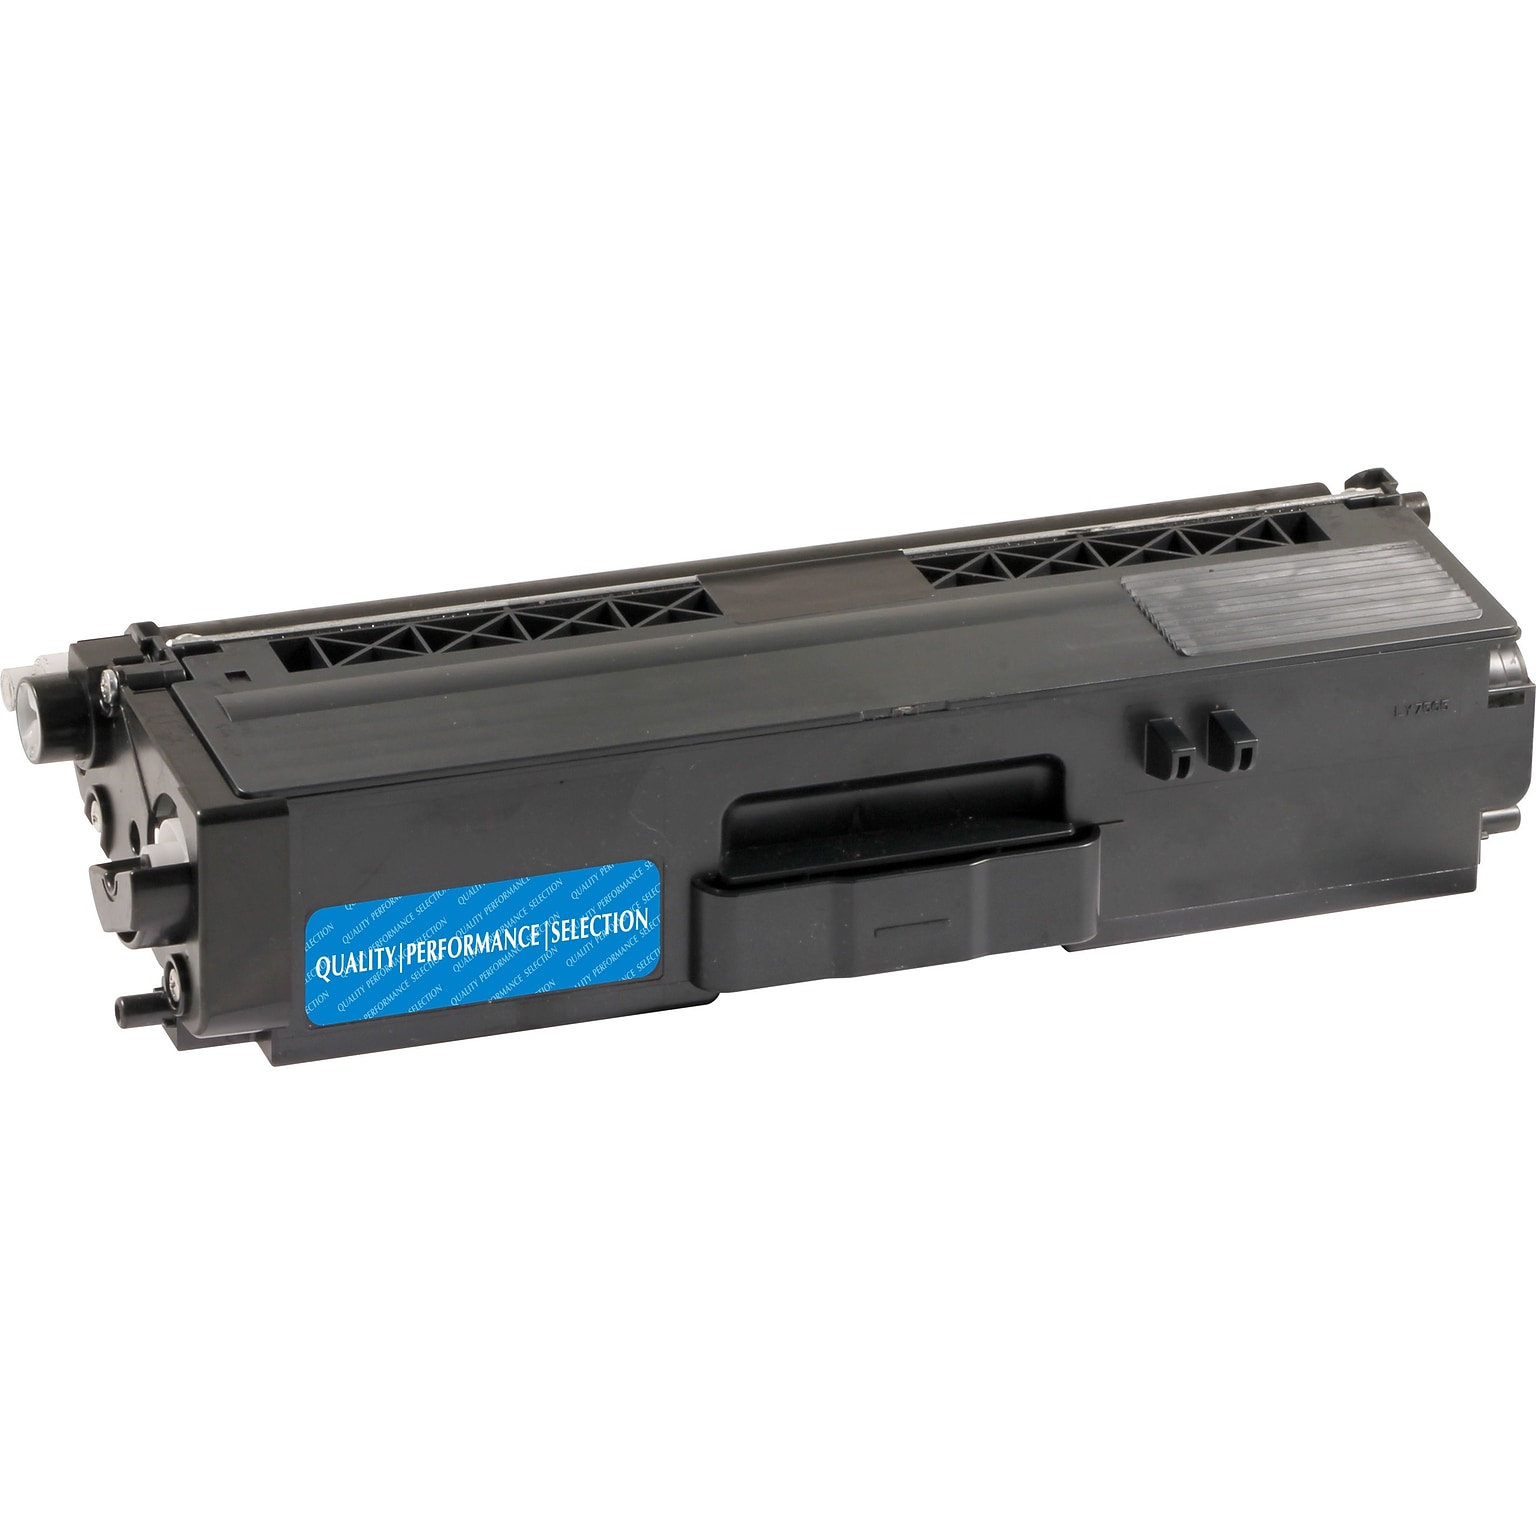 Quill Brand Remanufactured Cyan Standard Yield Toner Cartridge Replacement for Brother TN-331 (TN-331C)